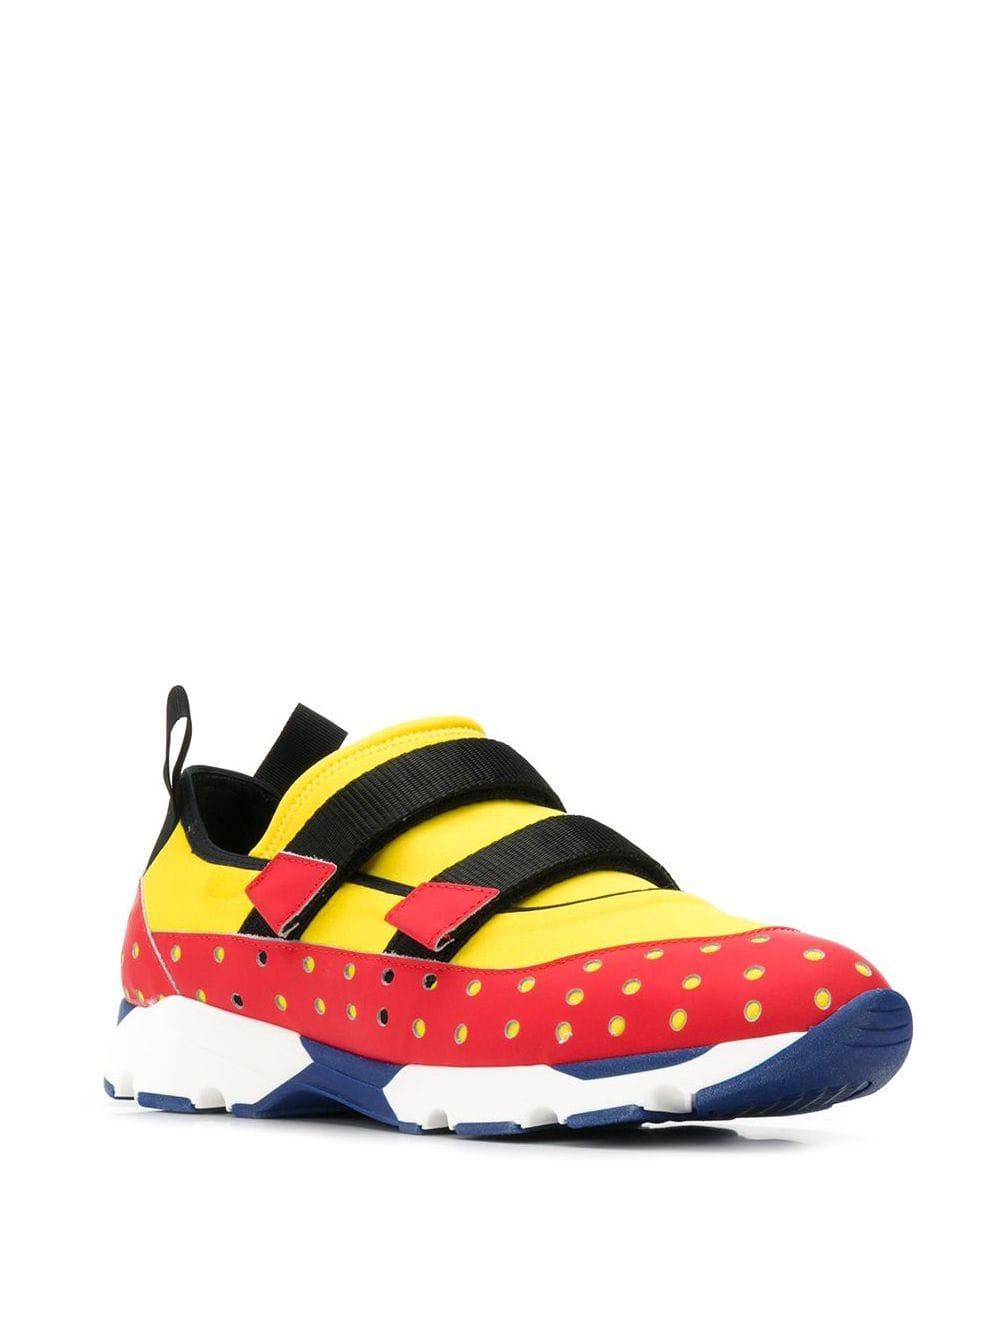 Marni Leather Perforated Panel Sneakers in Yellow for Men - Lyst